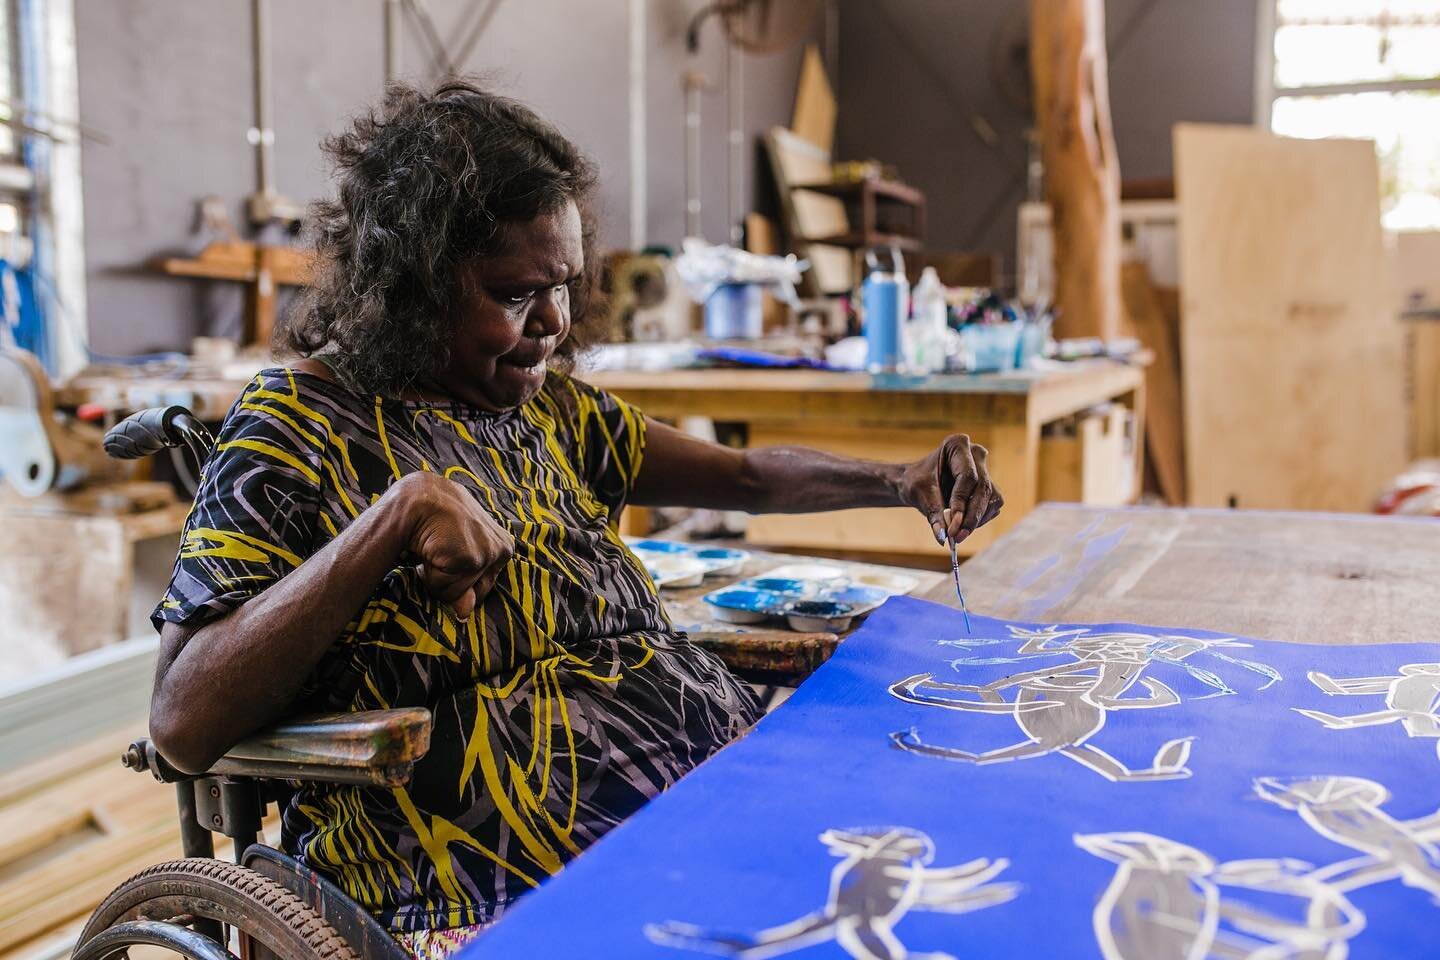 Yolŋu artist Dhambit Mununggurr in the midst of her creative process within @bukuartnow , as photographed for the #ngvtriennial. What an honor to capture this dynamic wulgaman rendering her ancestral stories and her own contemporary narratives.